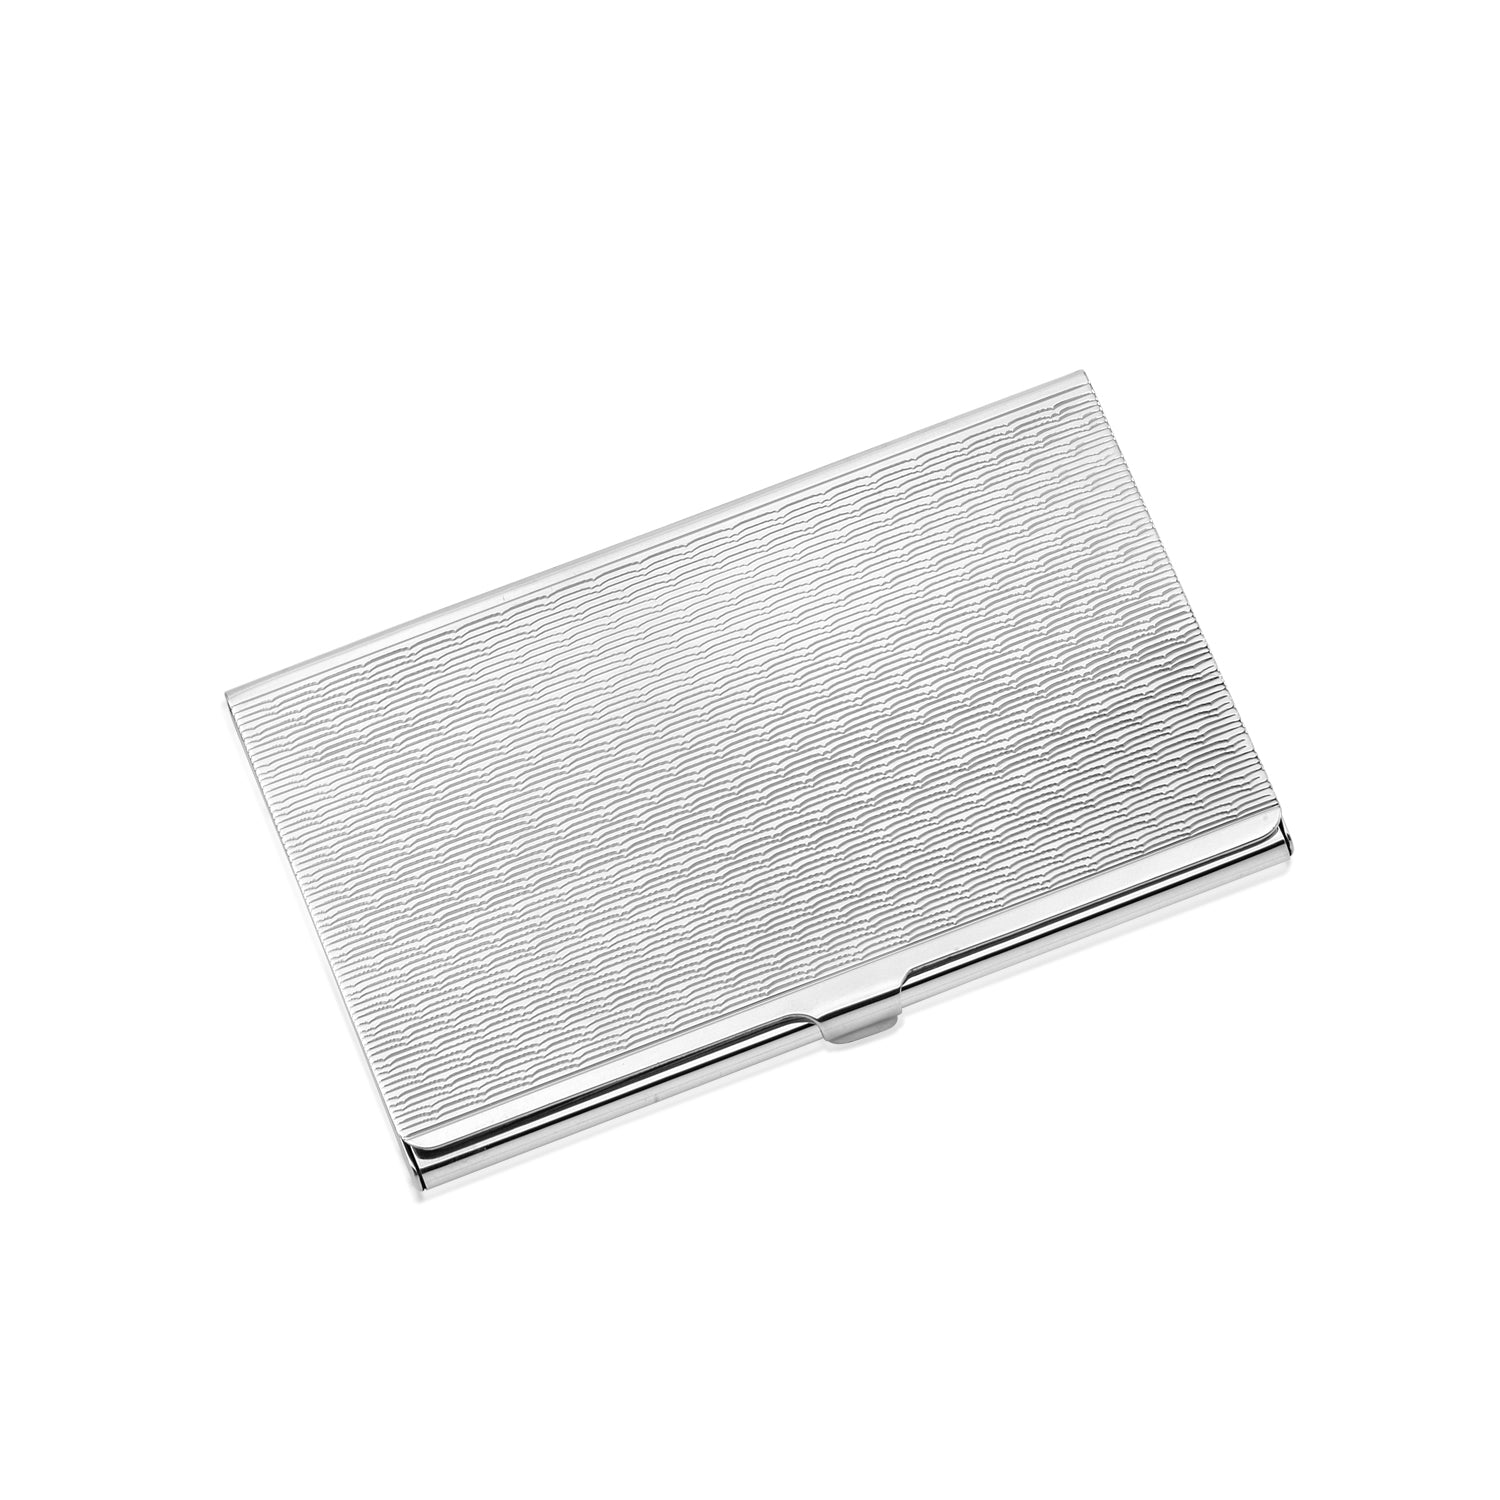 Zsamuel Luxury Sterling Silver 925 Business Card Holder Italy